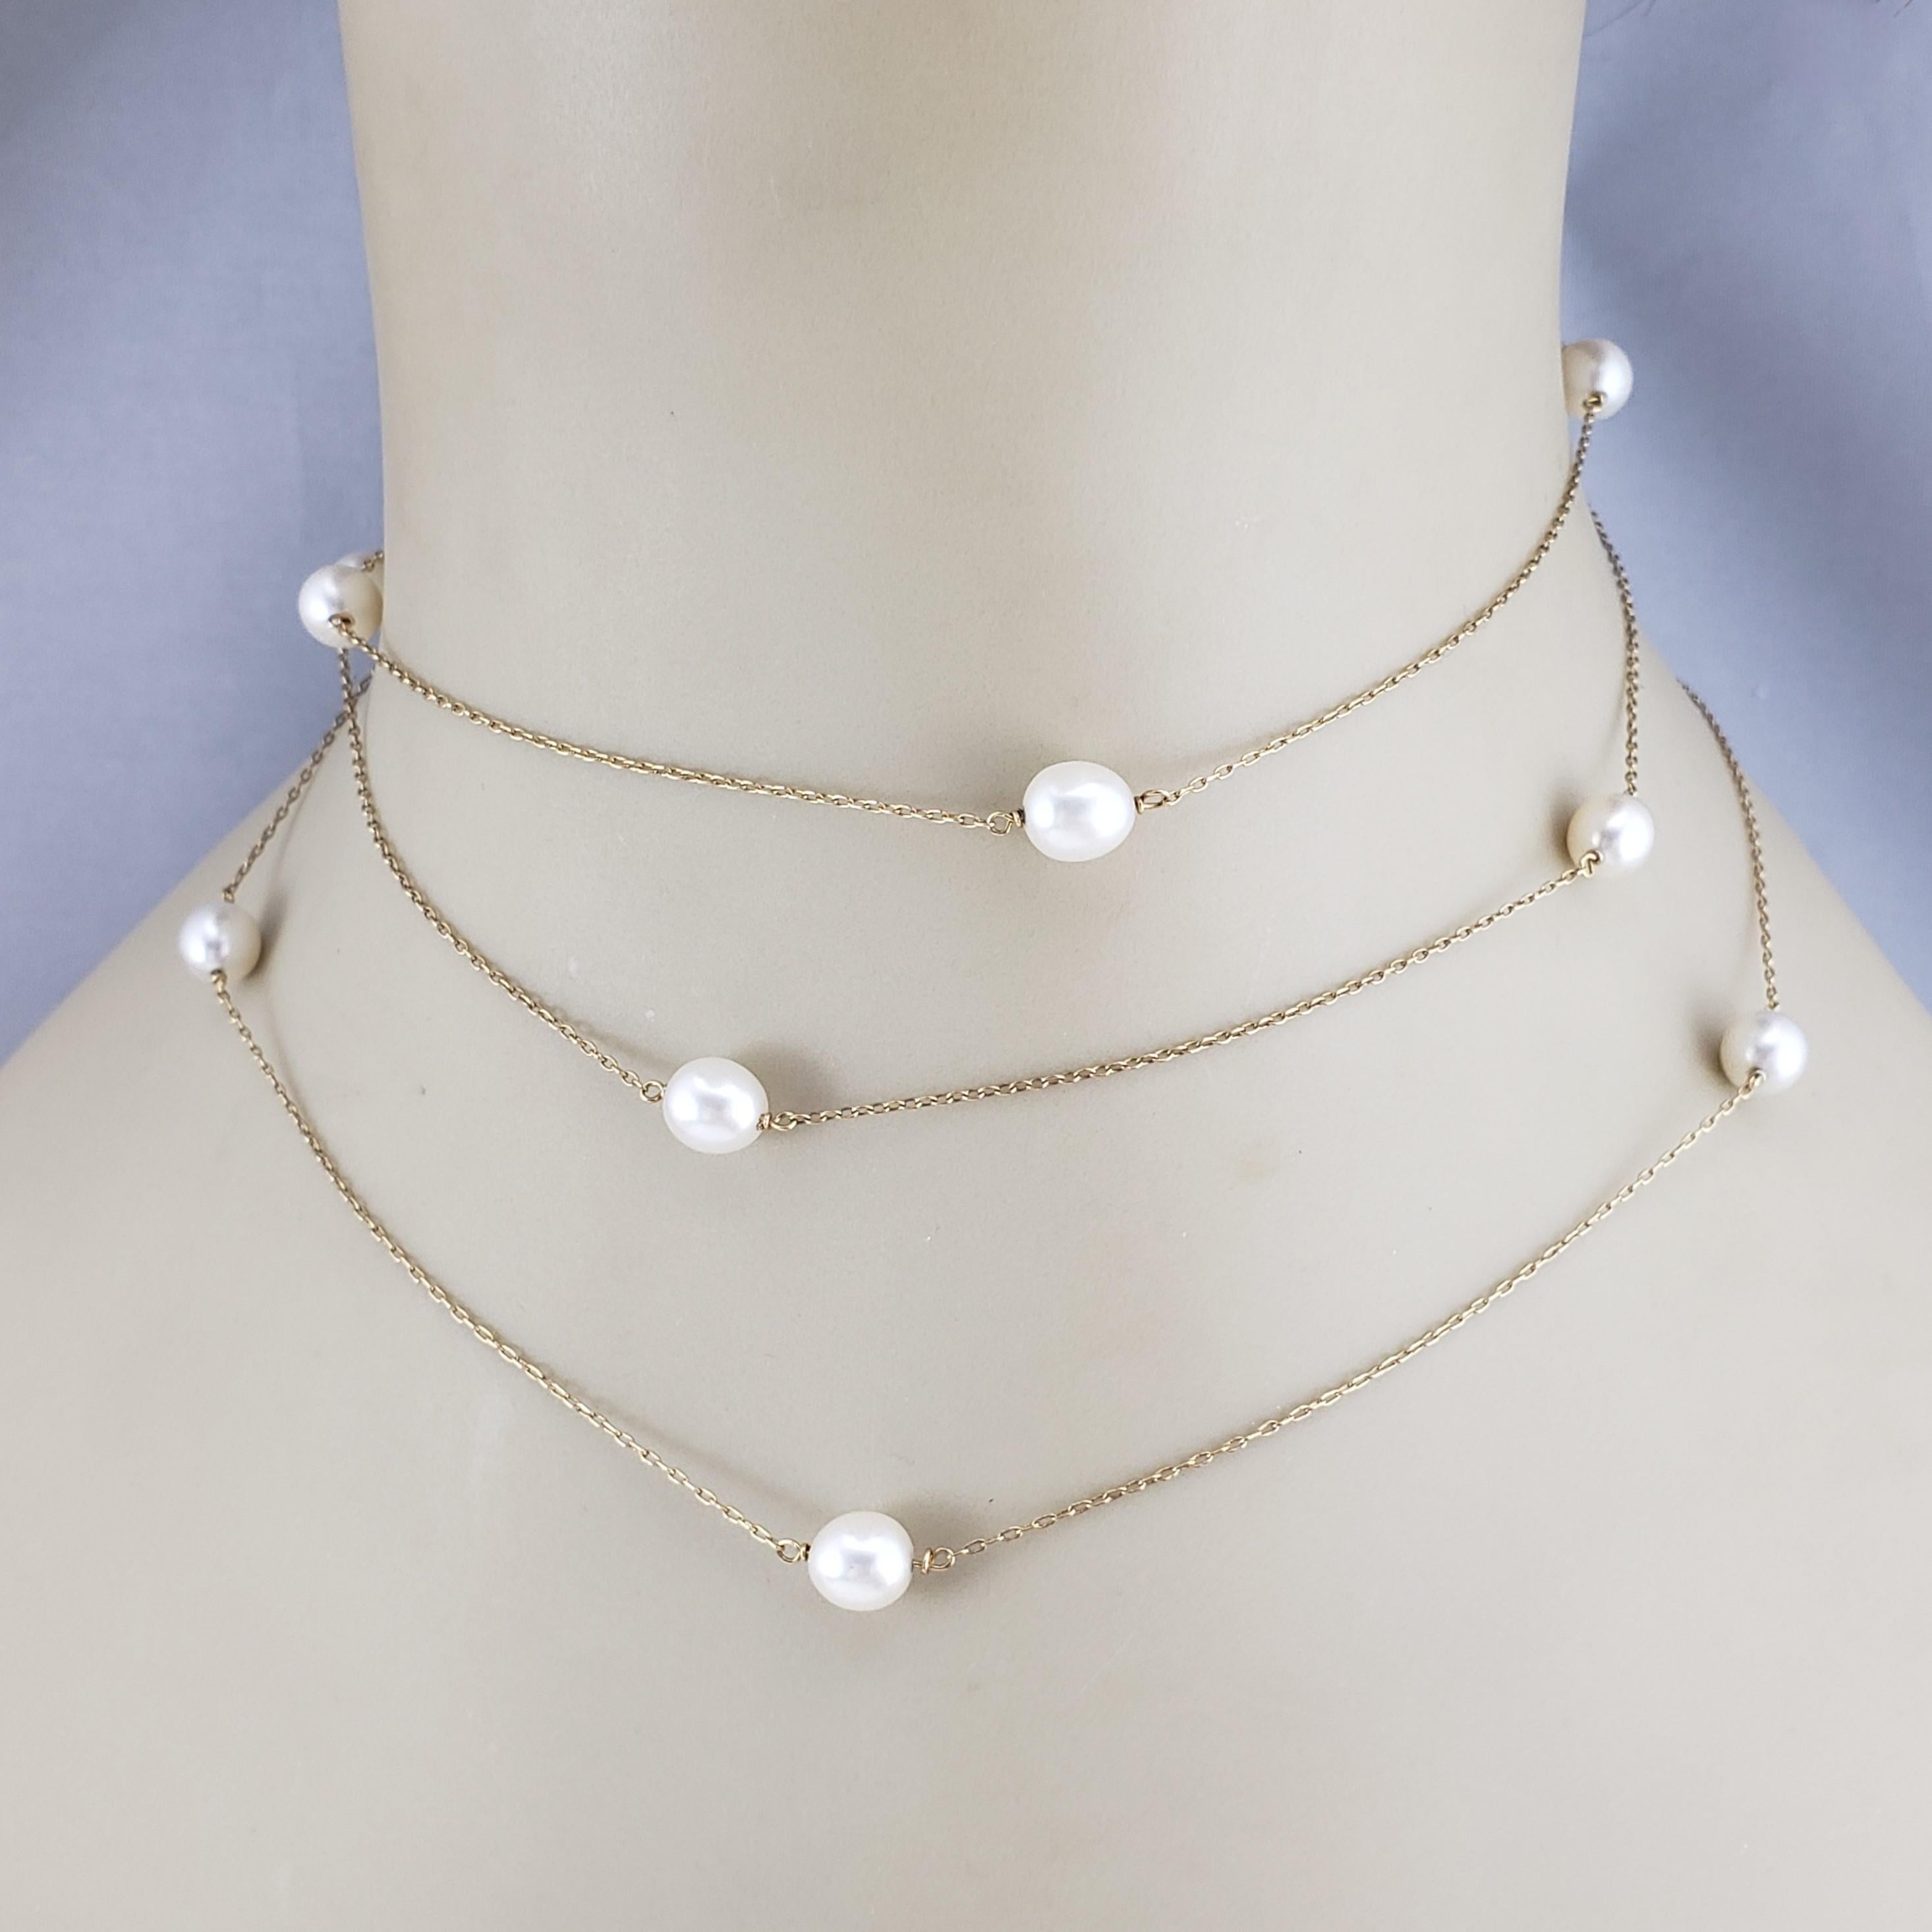 Tiffany & Co. Peretti 18K Yellow Gold Pearls by the Yard Necklace 45